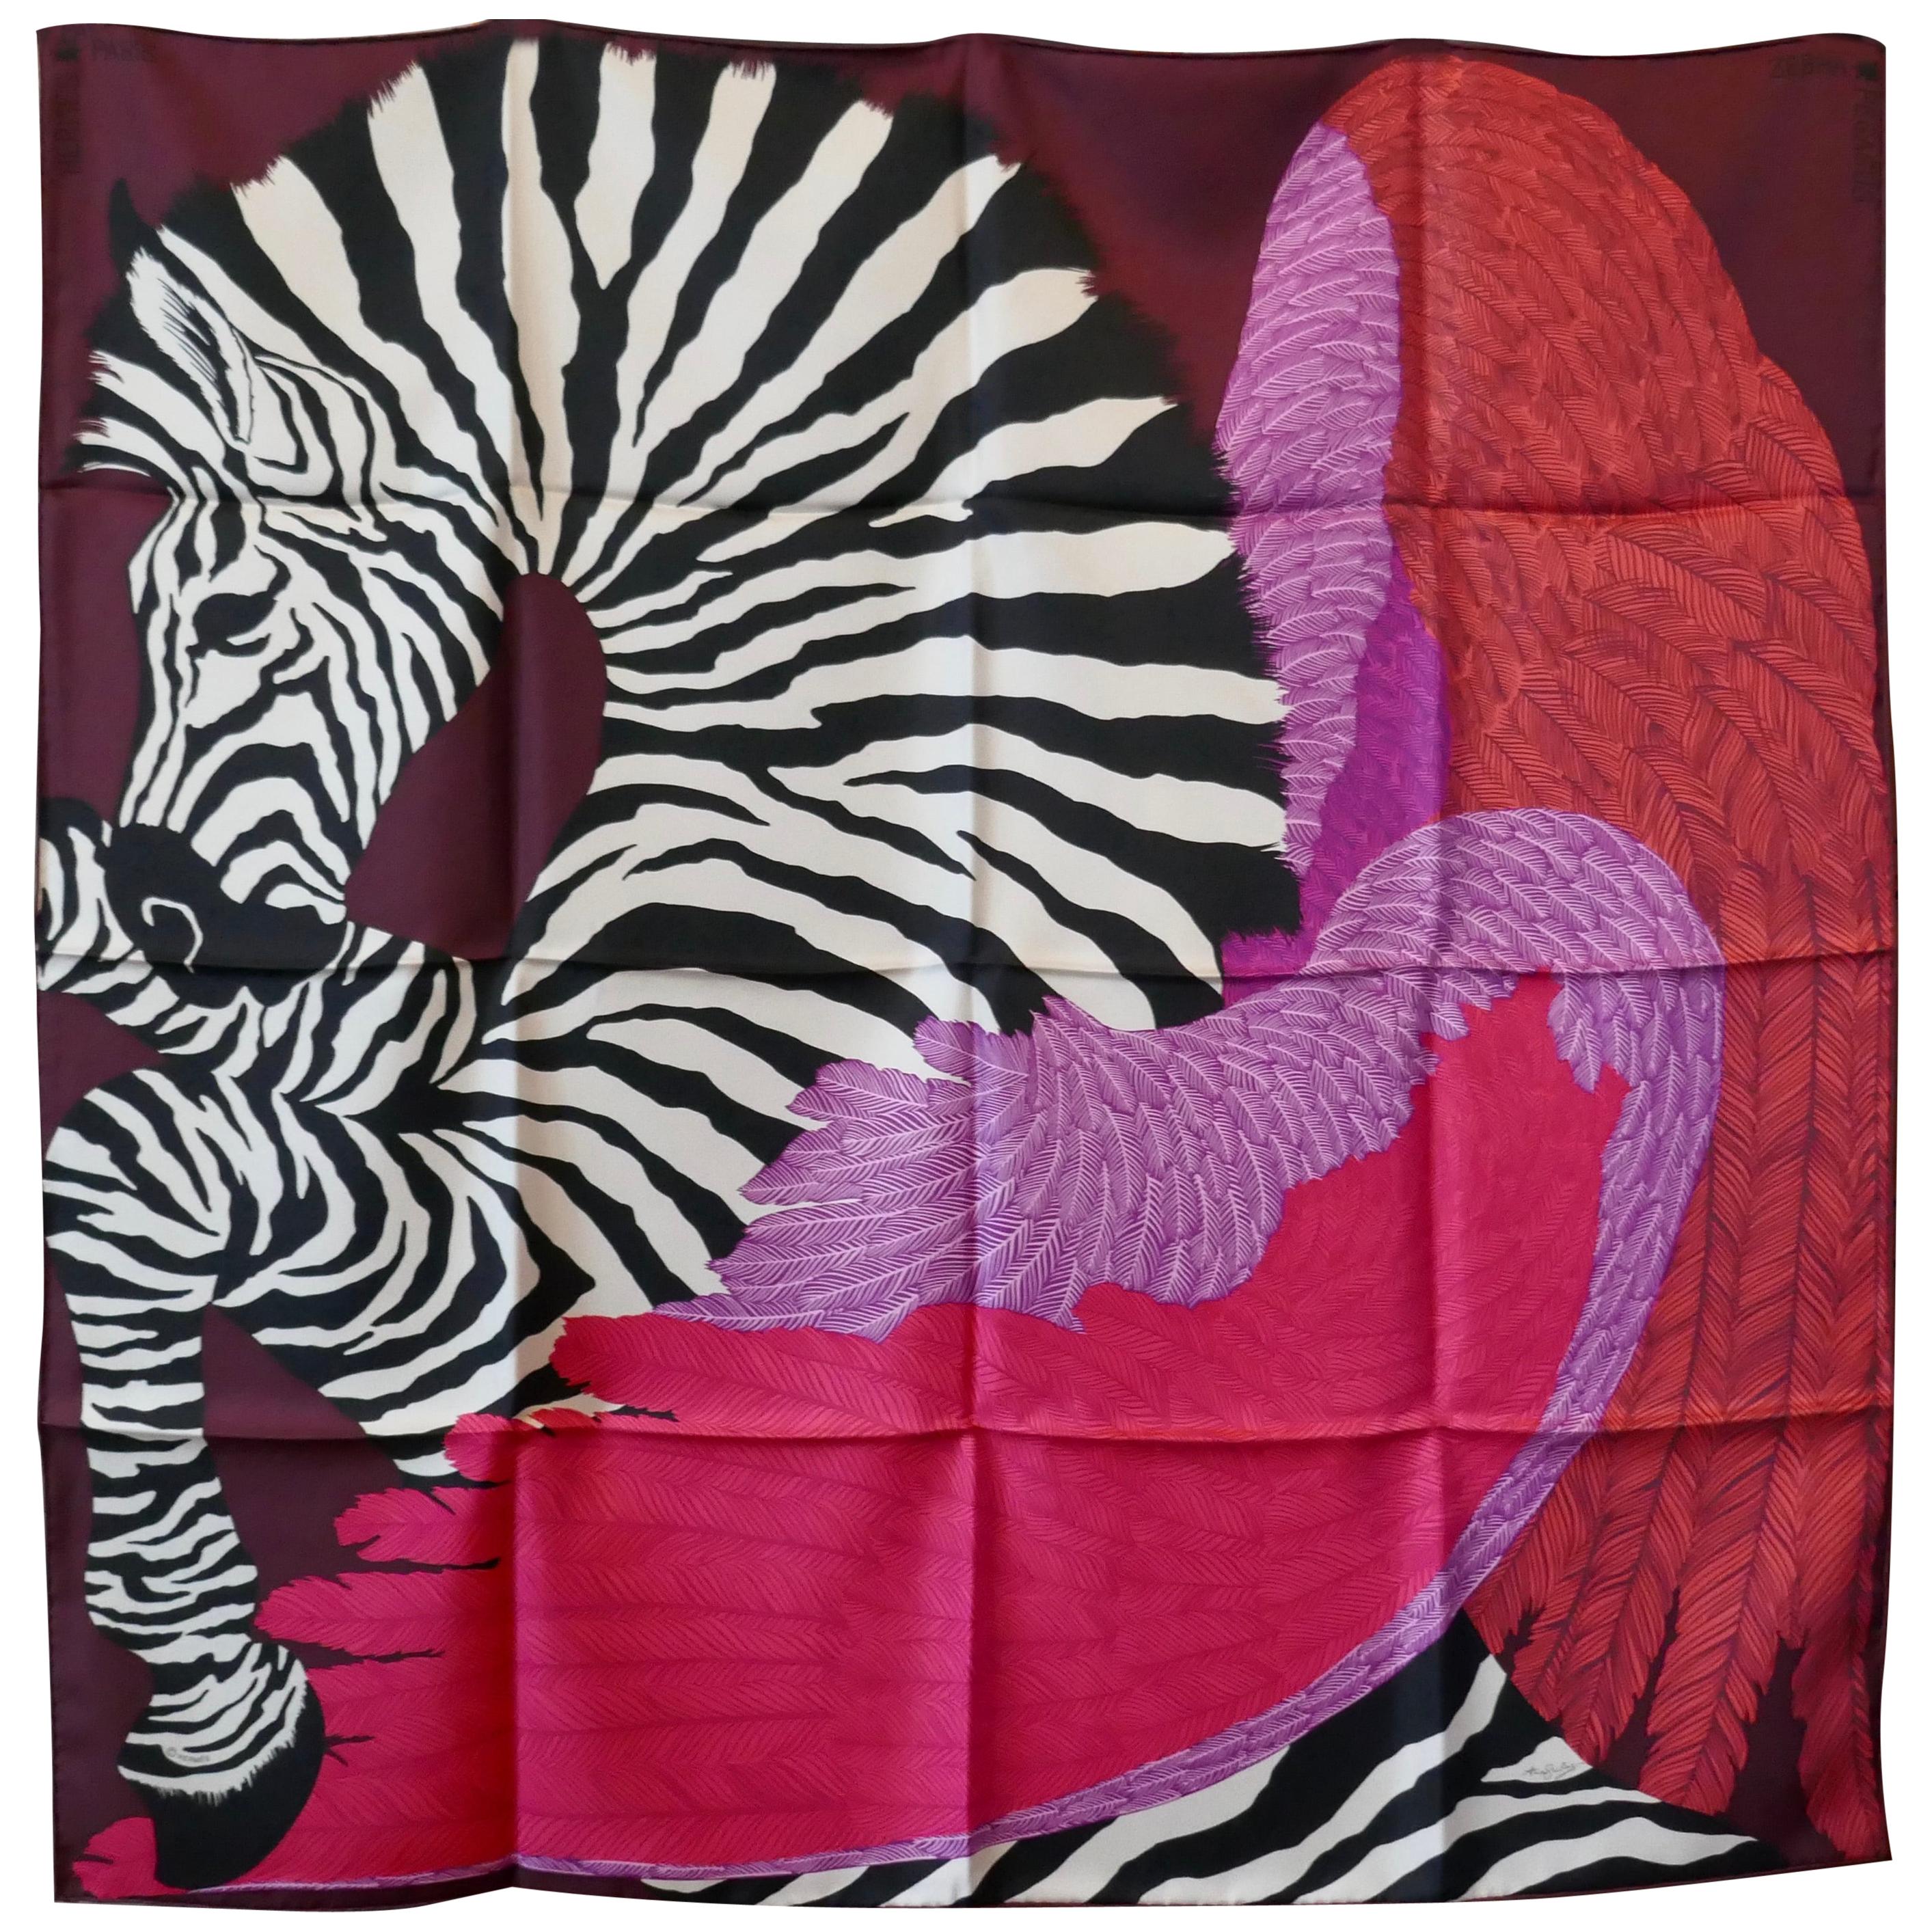 Great Hermes Silk Scarf “Zebra Pegasus” by Alice Shirley, 2014 First issue